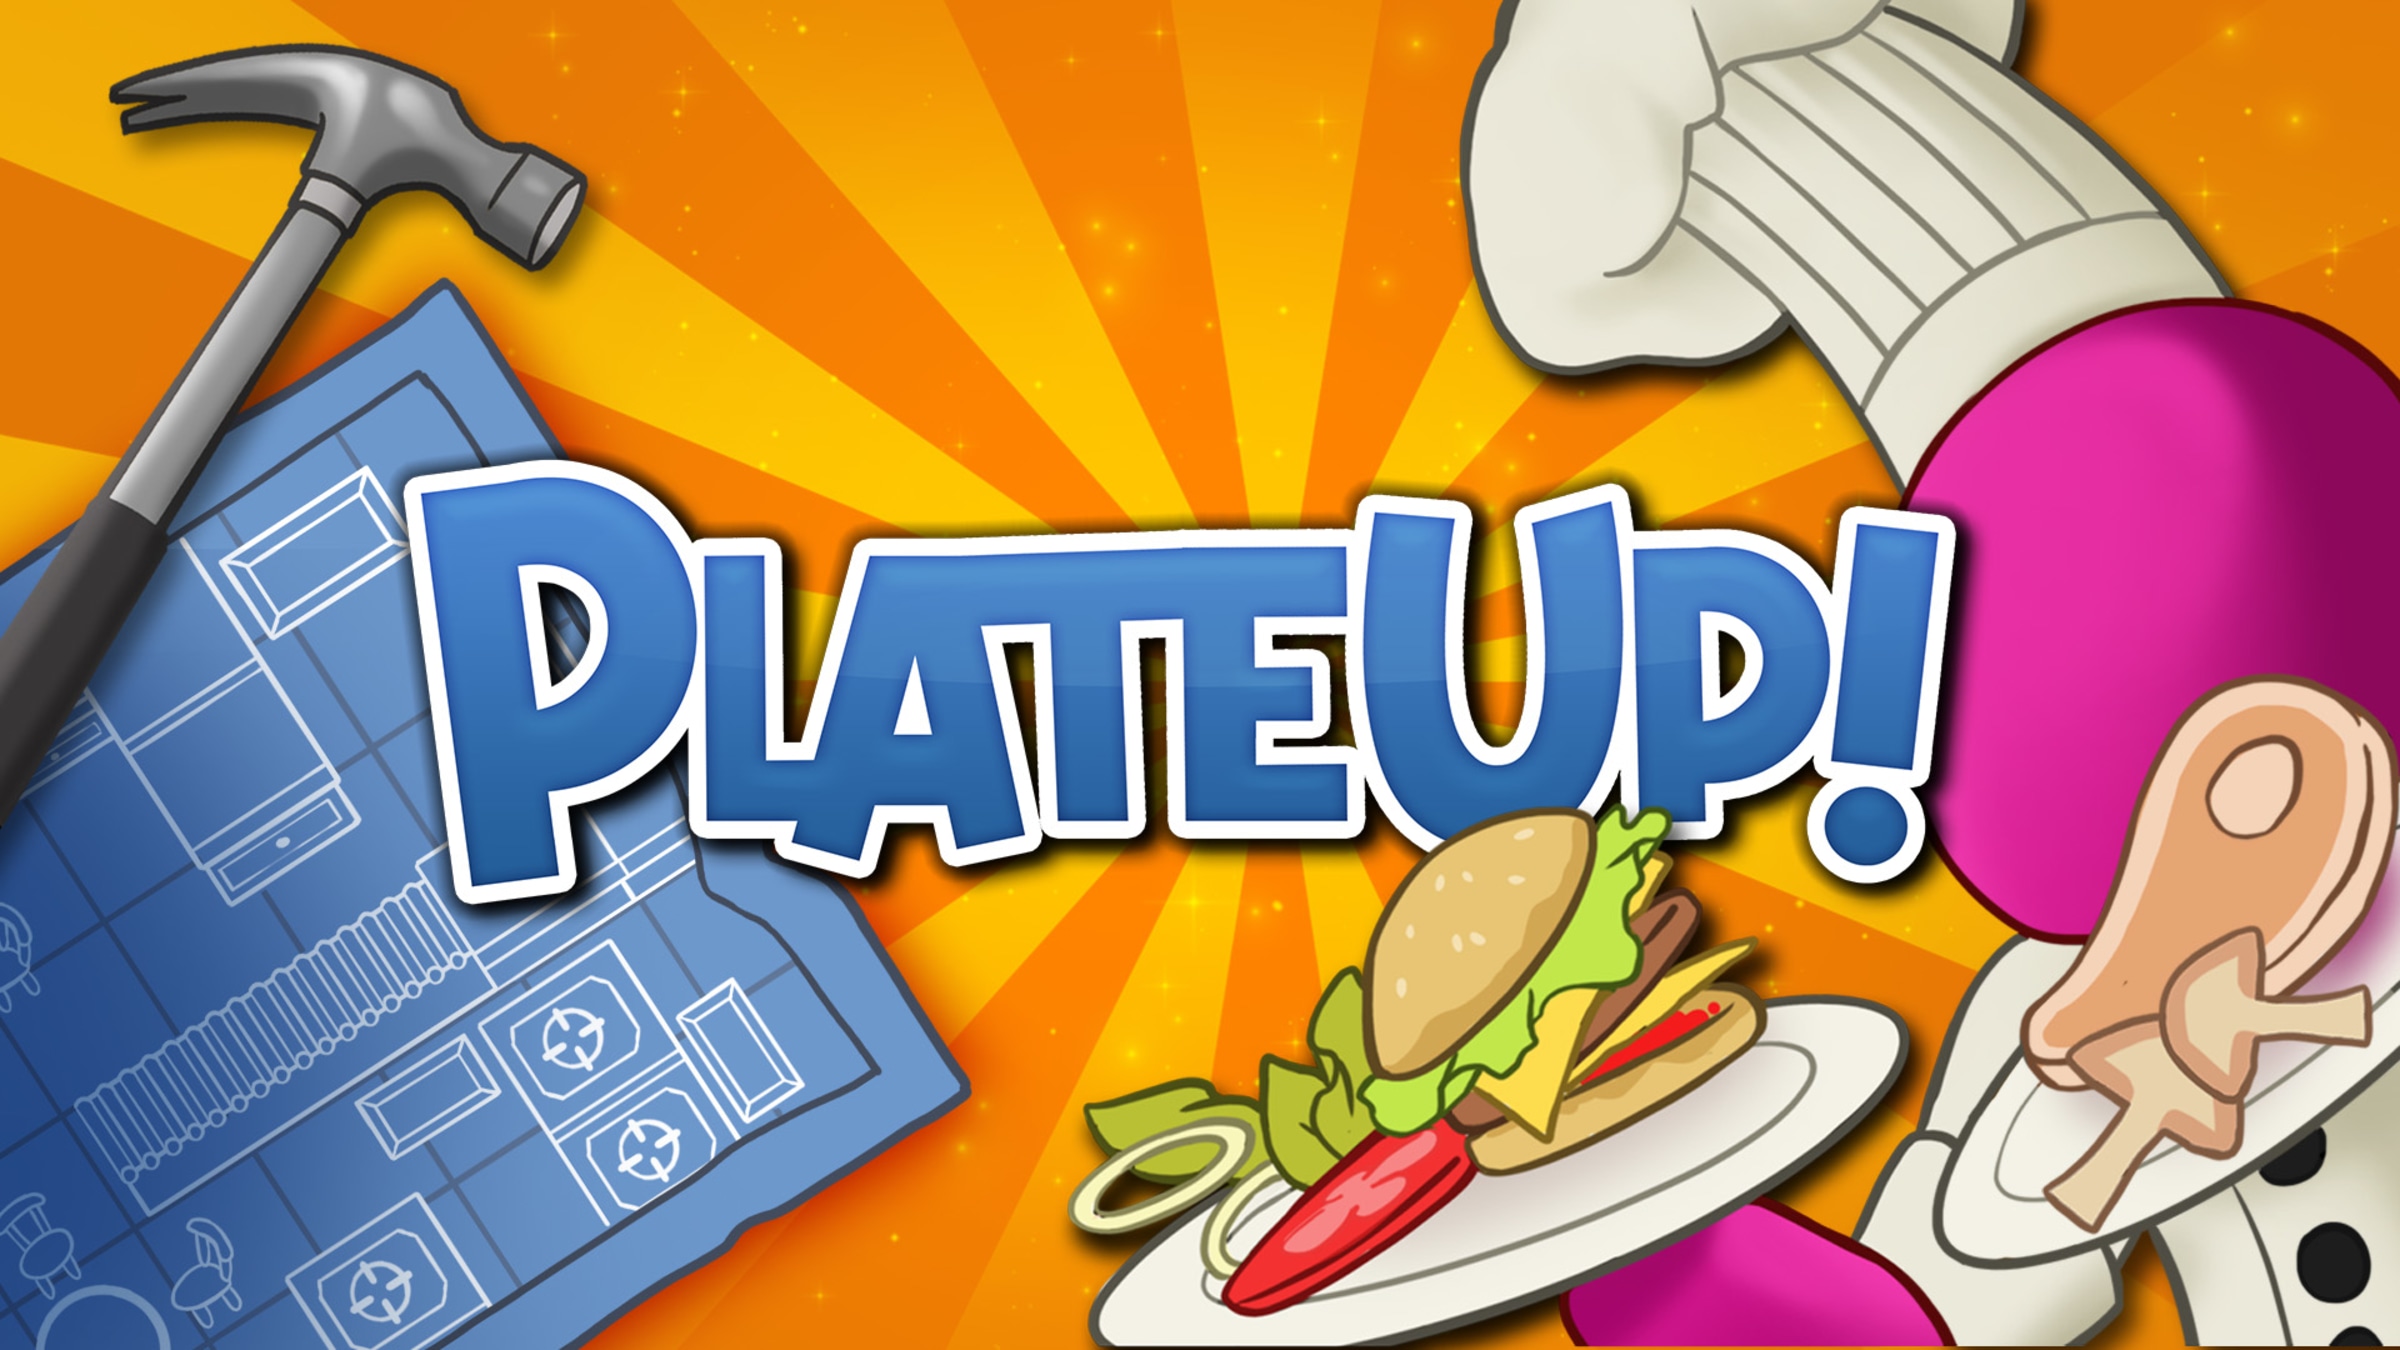 PlateUp Mobile iPhone iOS macOS Version Full Game Setup Free Download